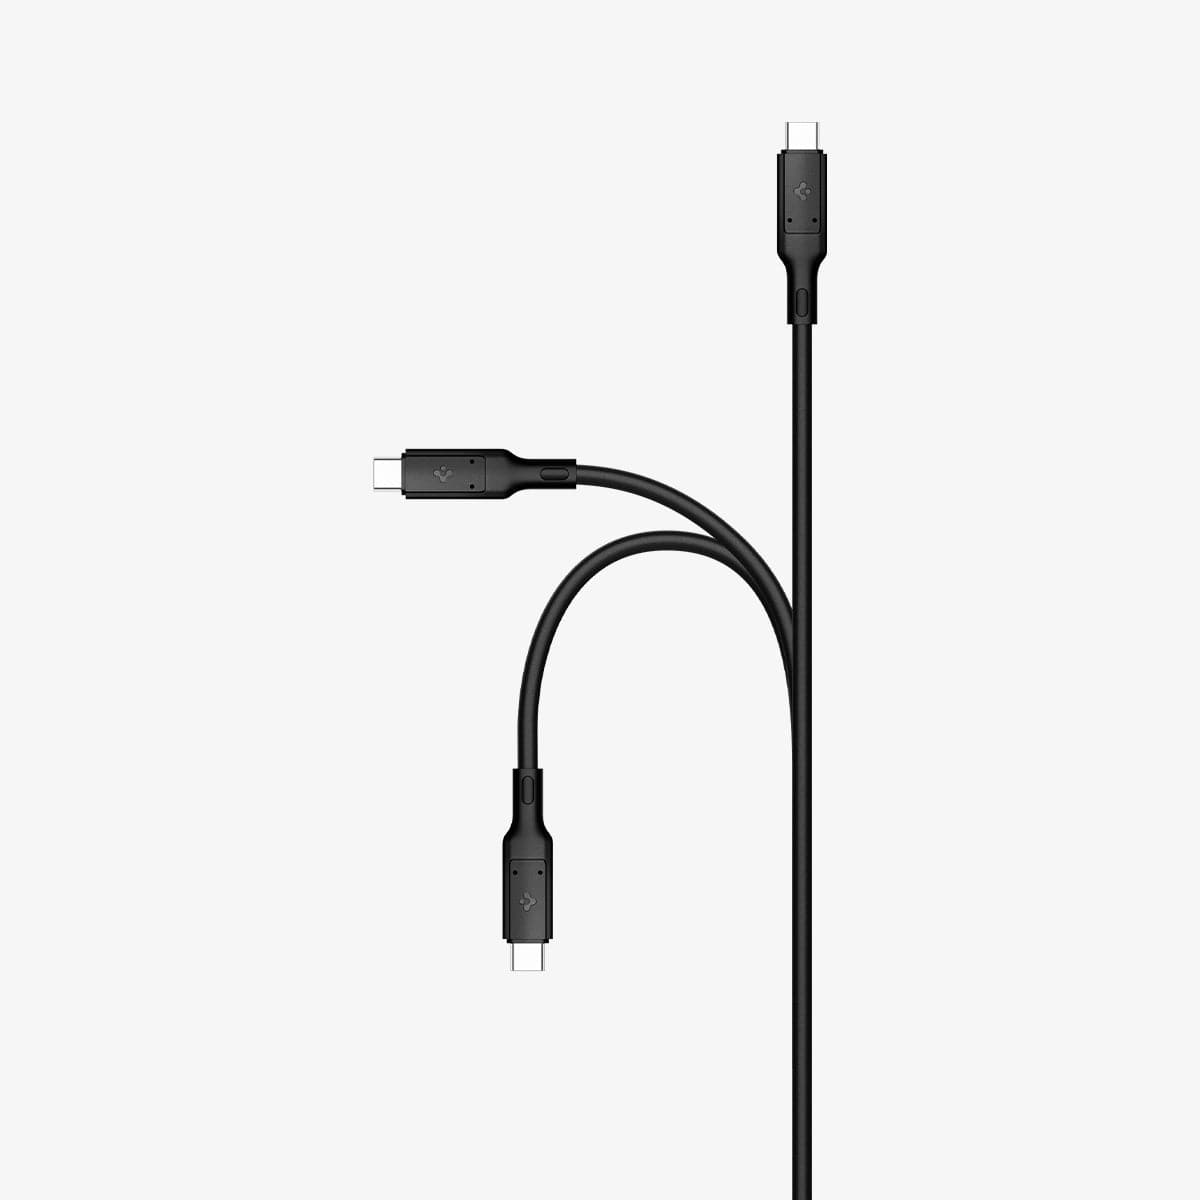 ACA02201 - ArcWire™ USB-C to USB-C 4 Cable in black showing the cable bending to show the durability